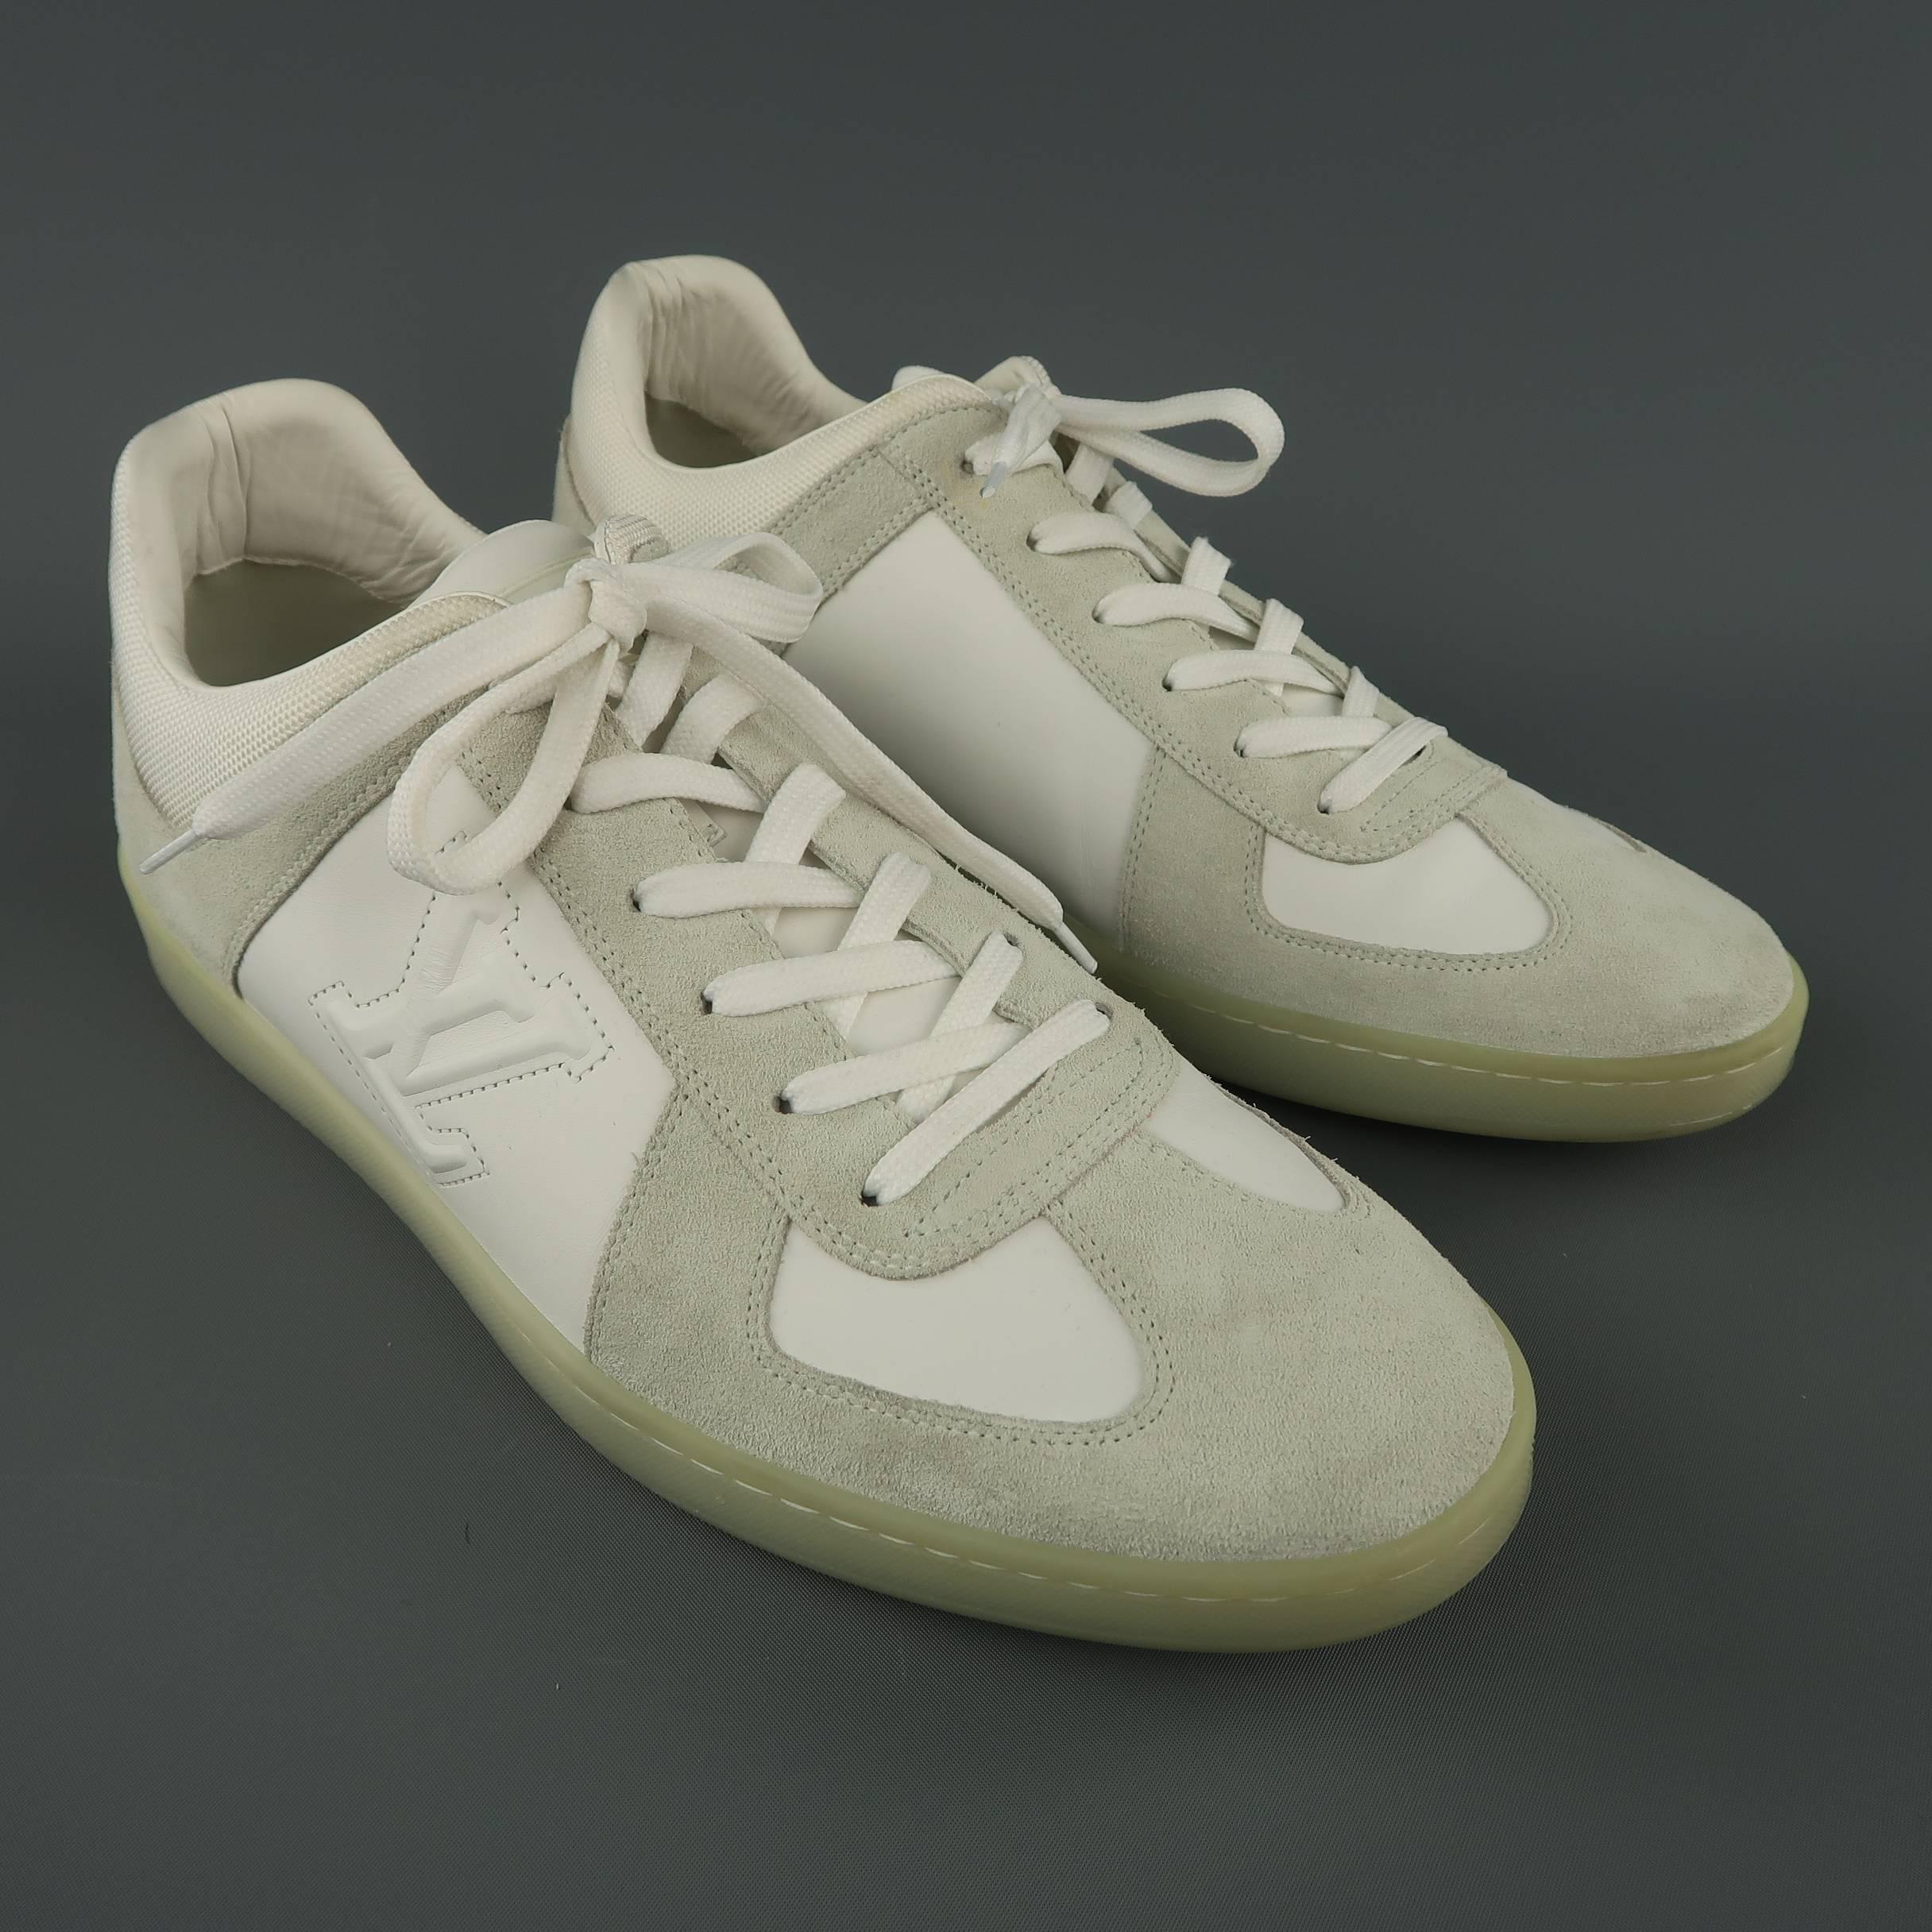 Louis Vuitton sneakers come in white leather with light gray suede panels, LV embossed side, and clear rubber sole. Minor wear. Made in Italy.
 Good Pre-Owned Condition.
Marked: UK 9.5
Outsole: 12 x 4 in.

